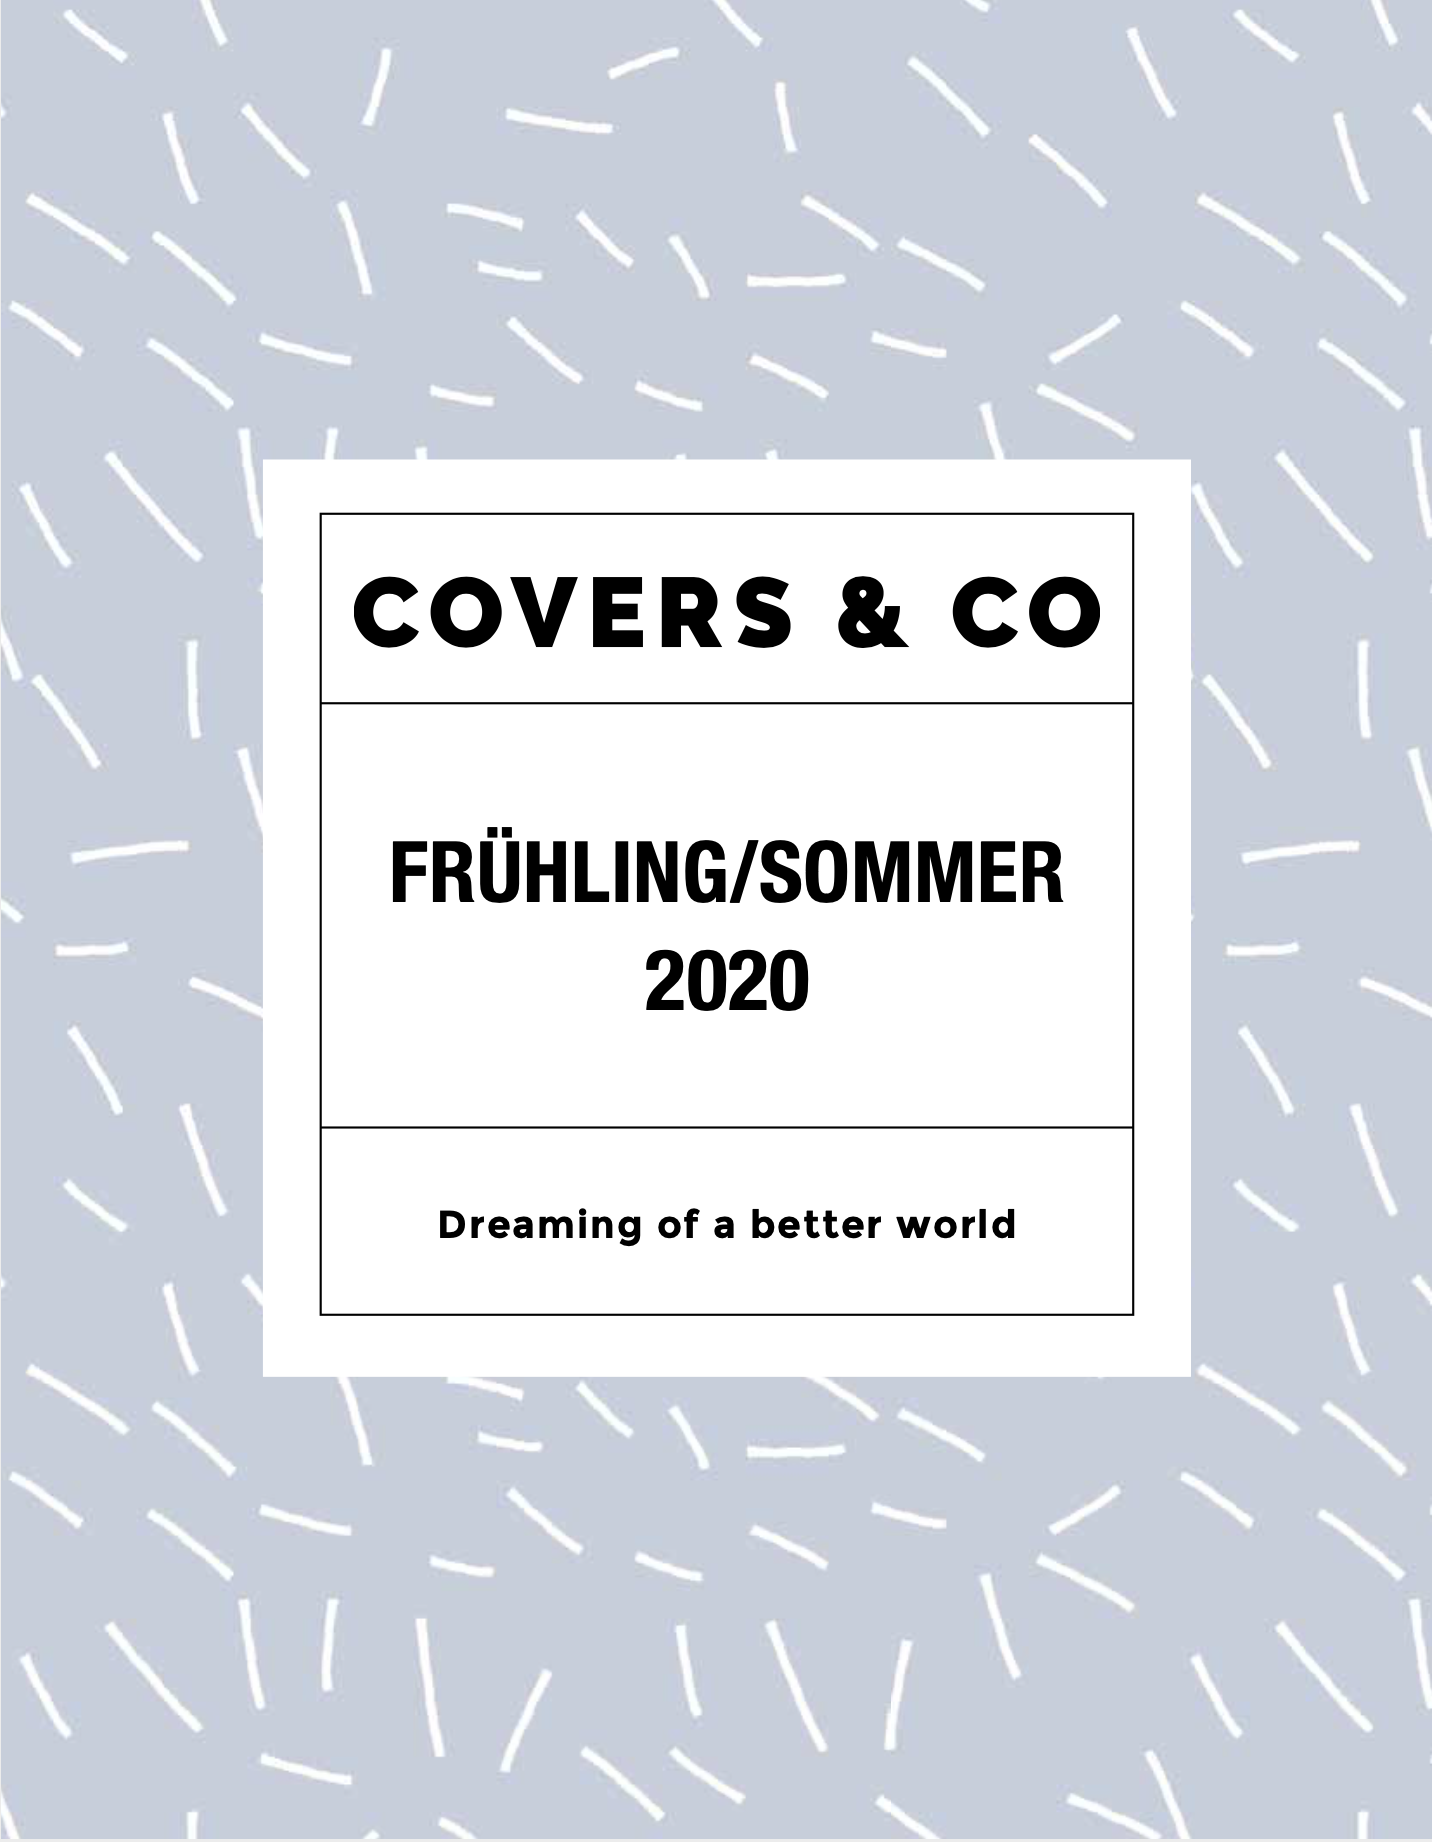 Covers & Co